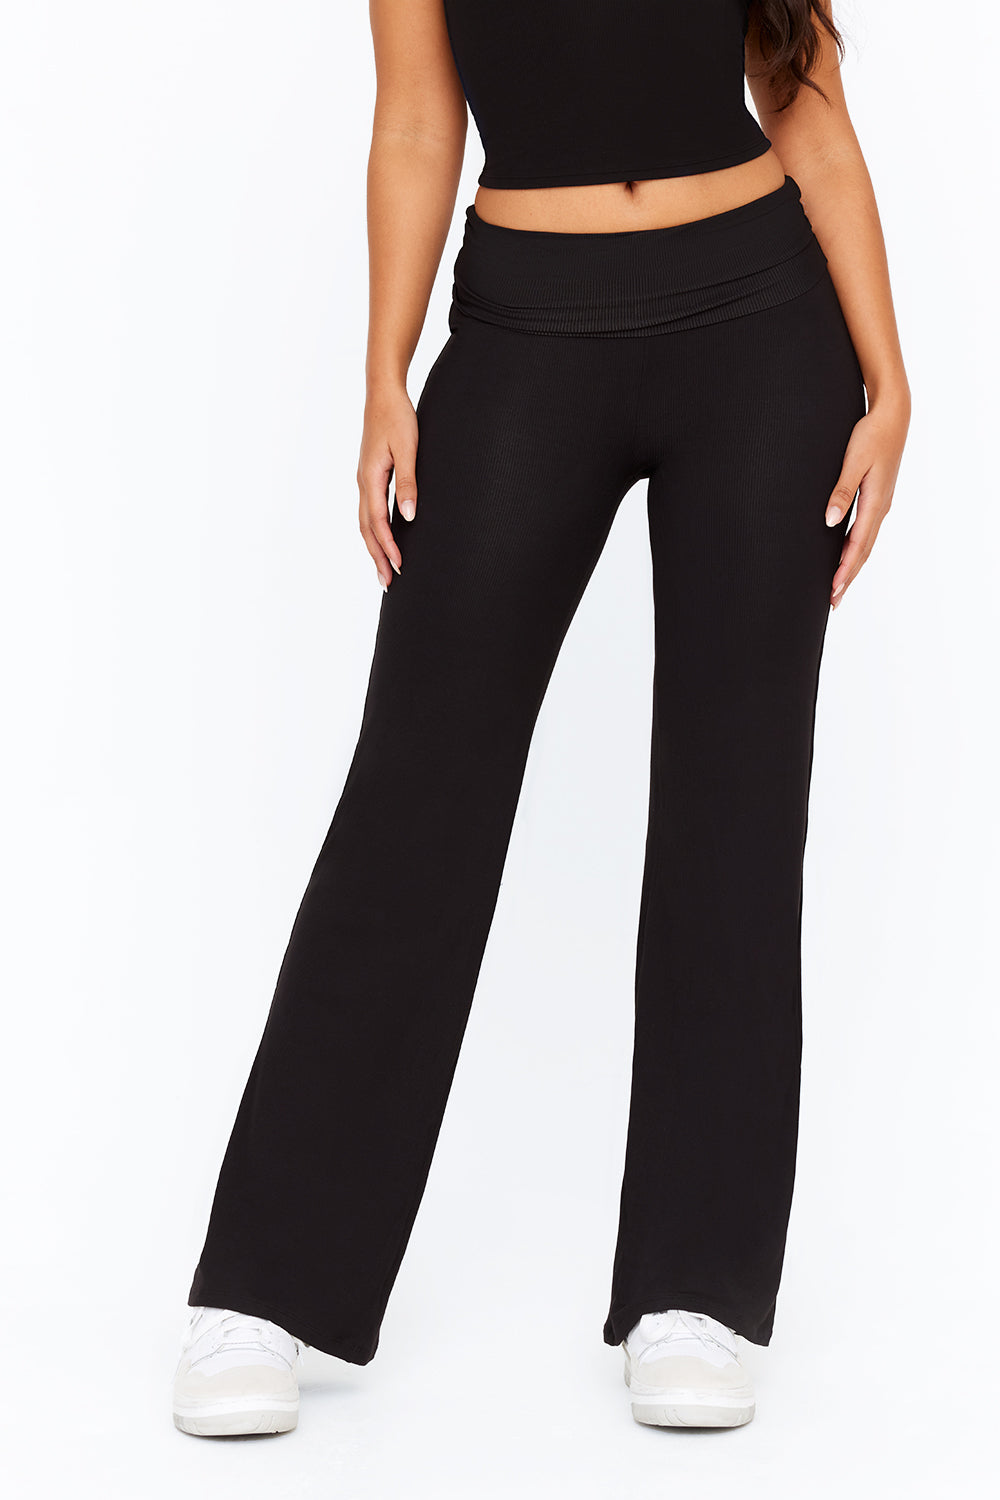 Soft Surroundings Pants Long Tall XL-T Black Lightweight High-Rise Tiered  Flare 